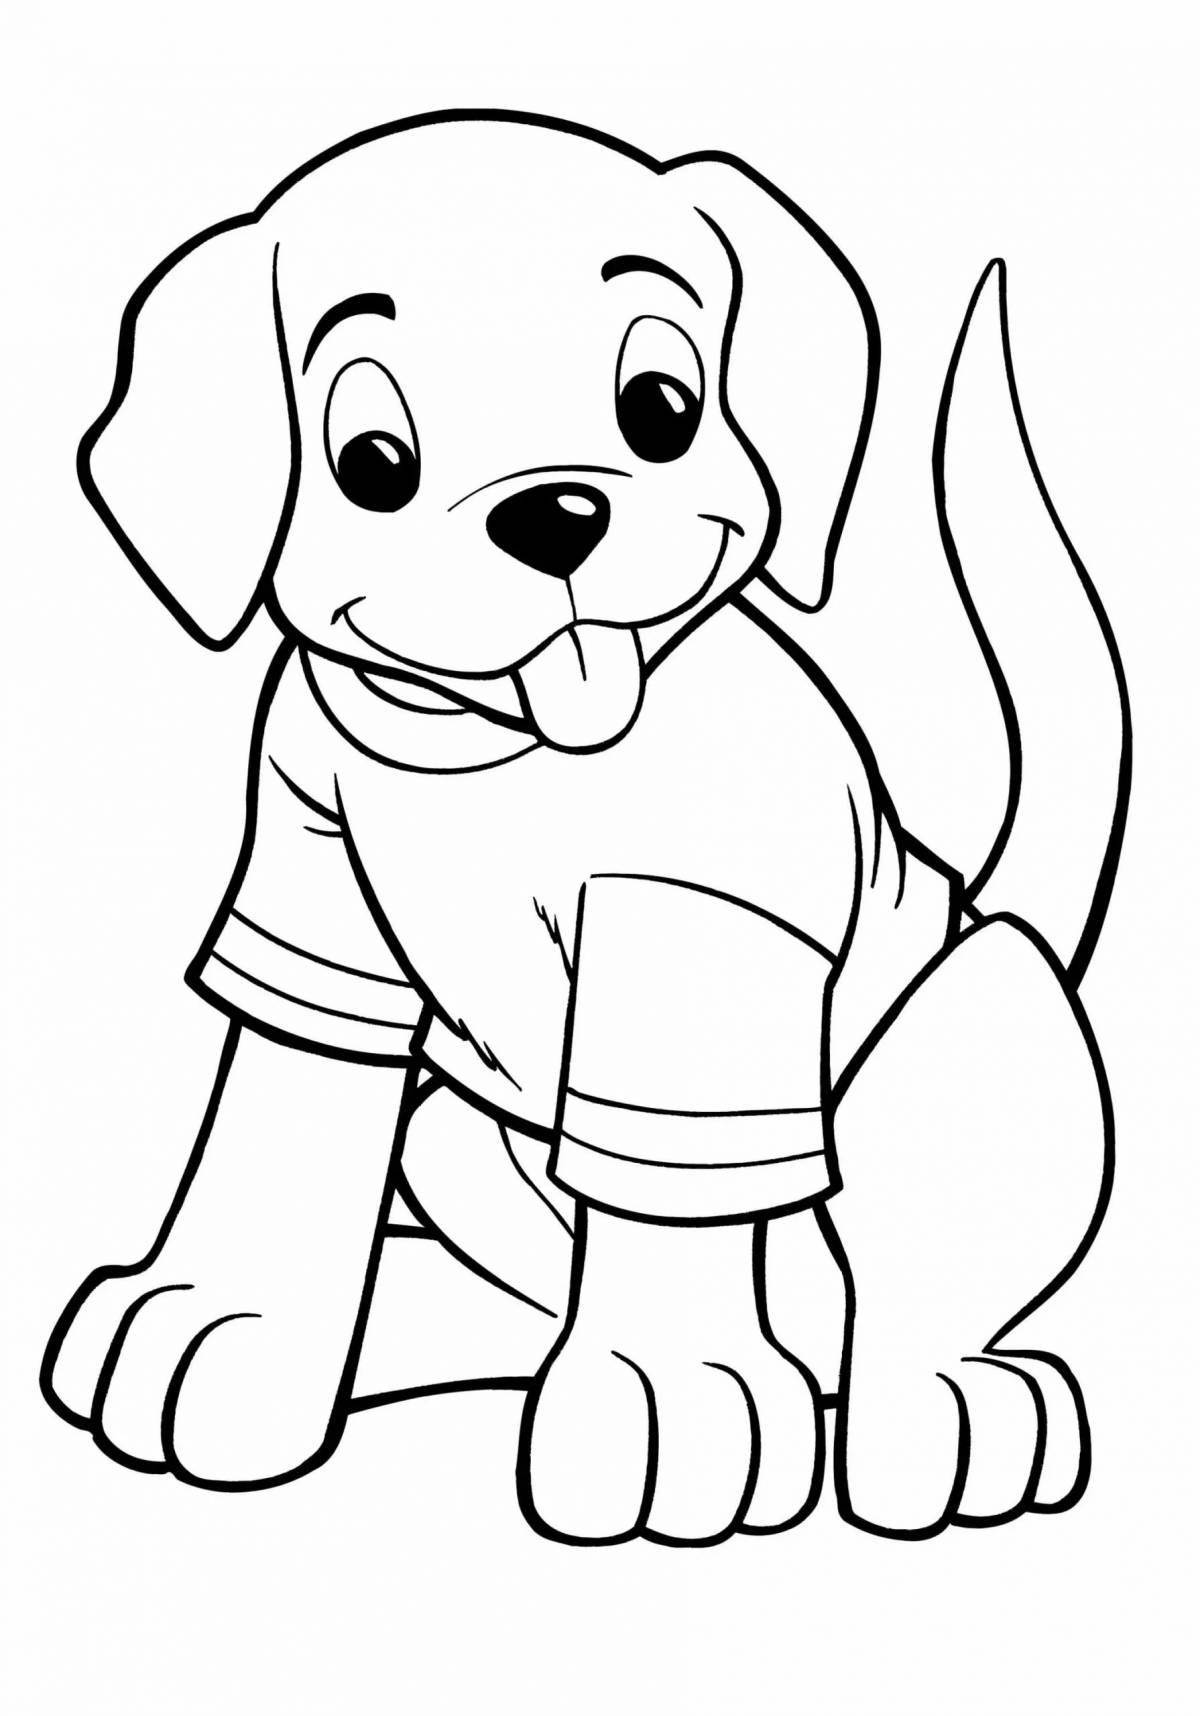 Snuggable dog coloring pages for boys